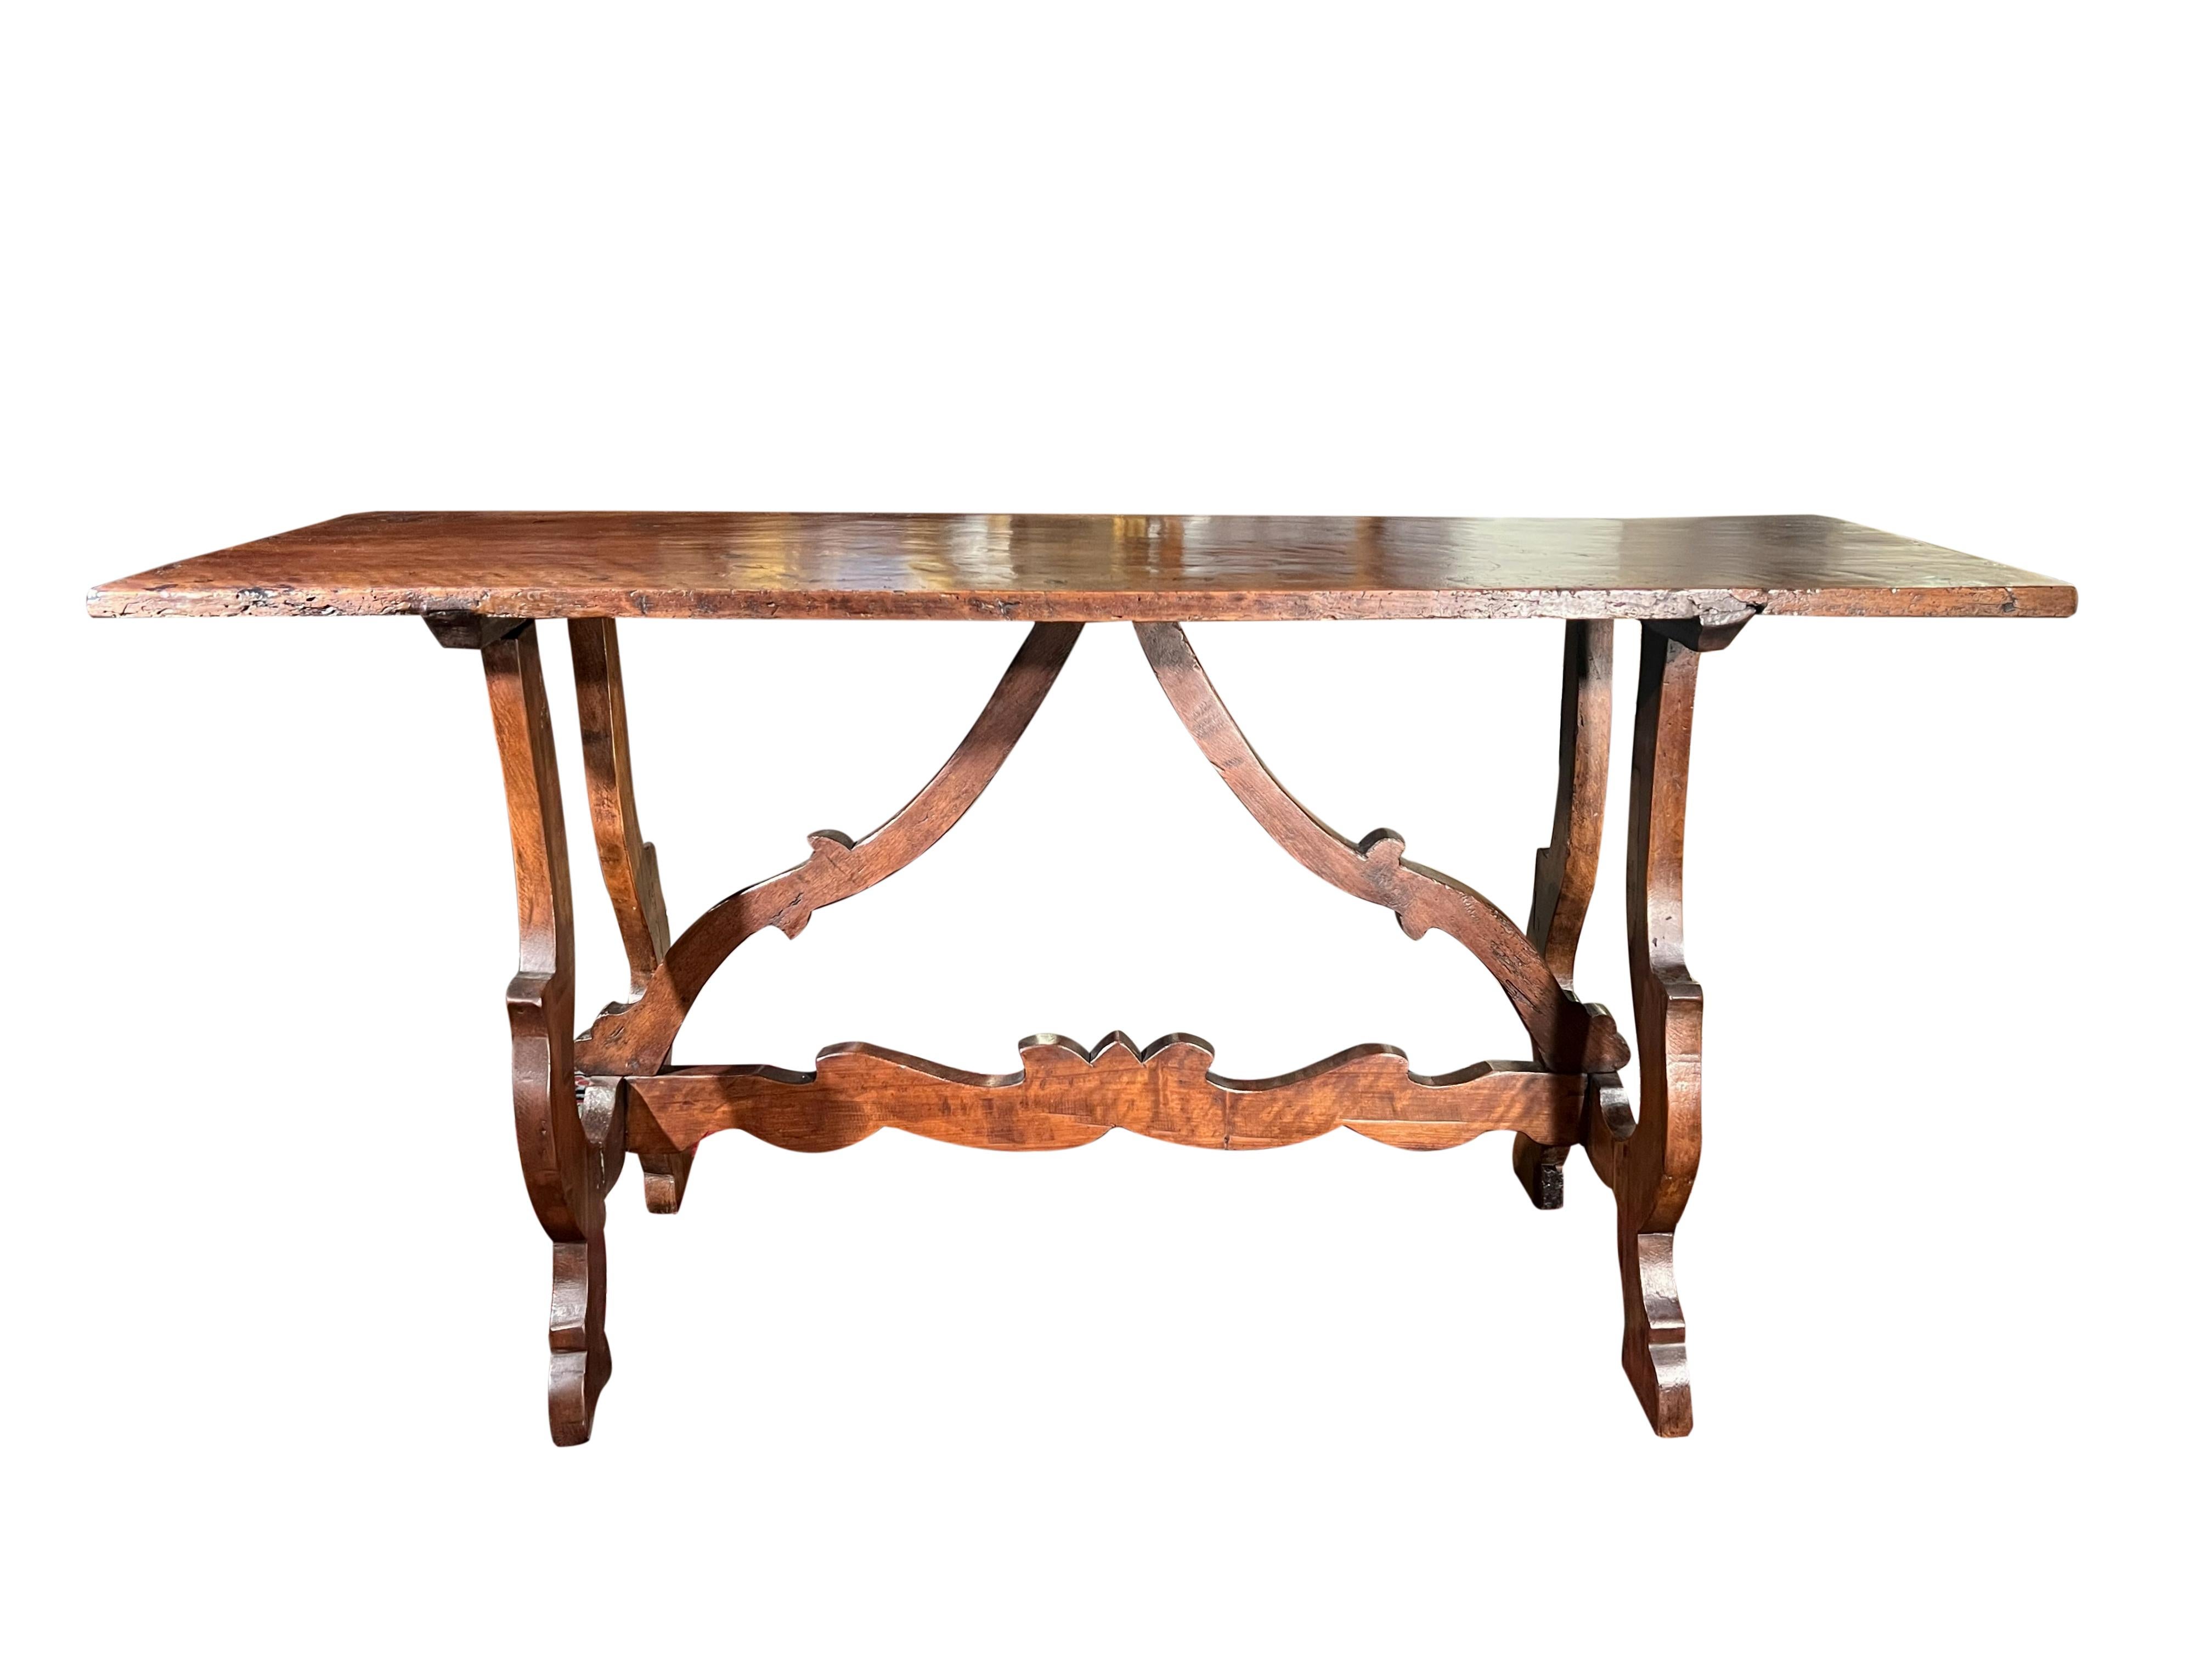  Italian 18th Century Tuscan Fratino Table with Lyre legs. For Sale 3